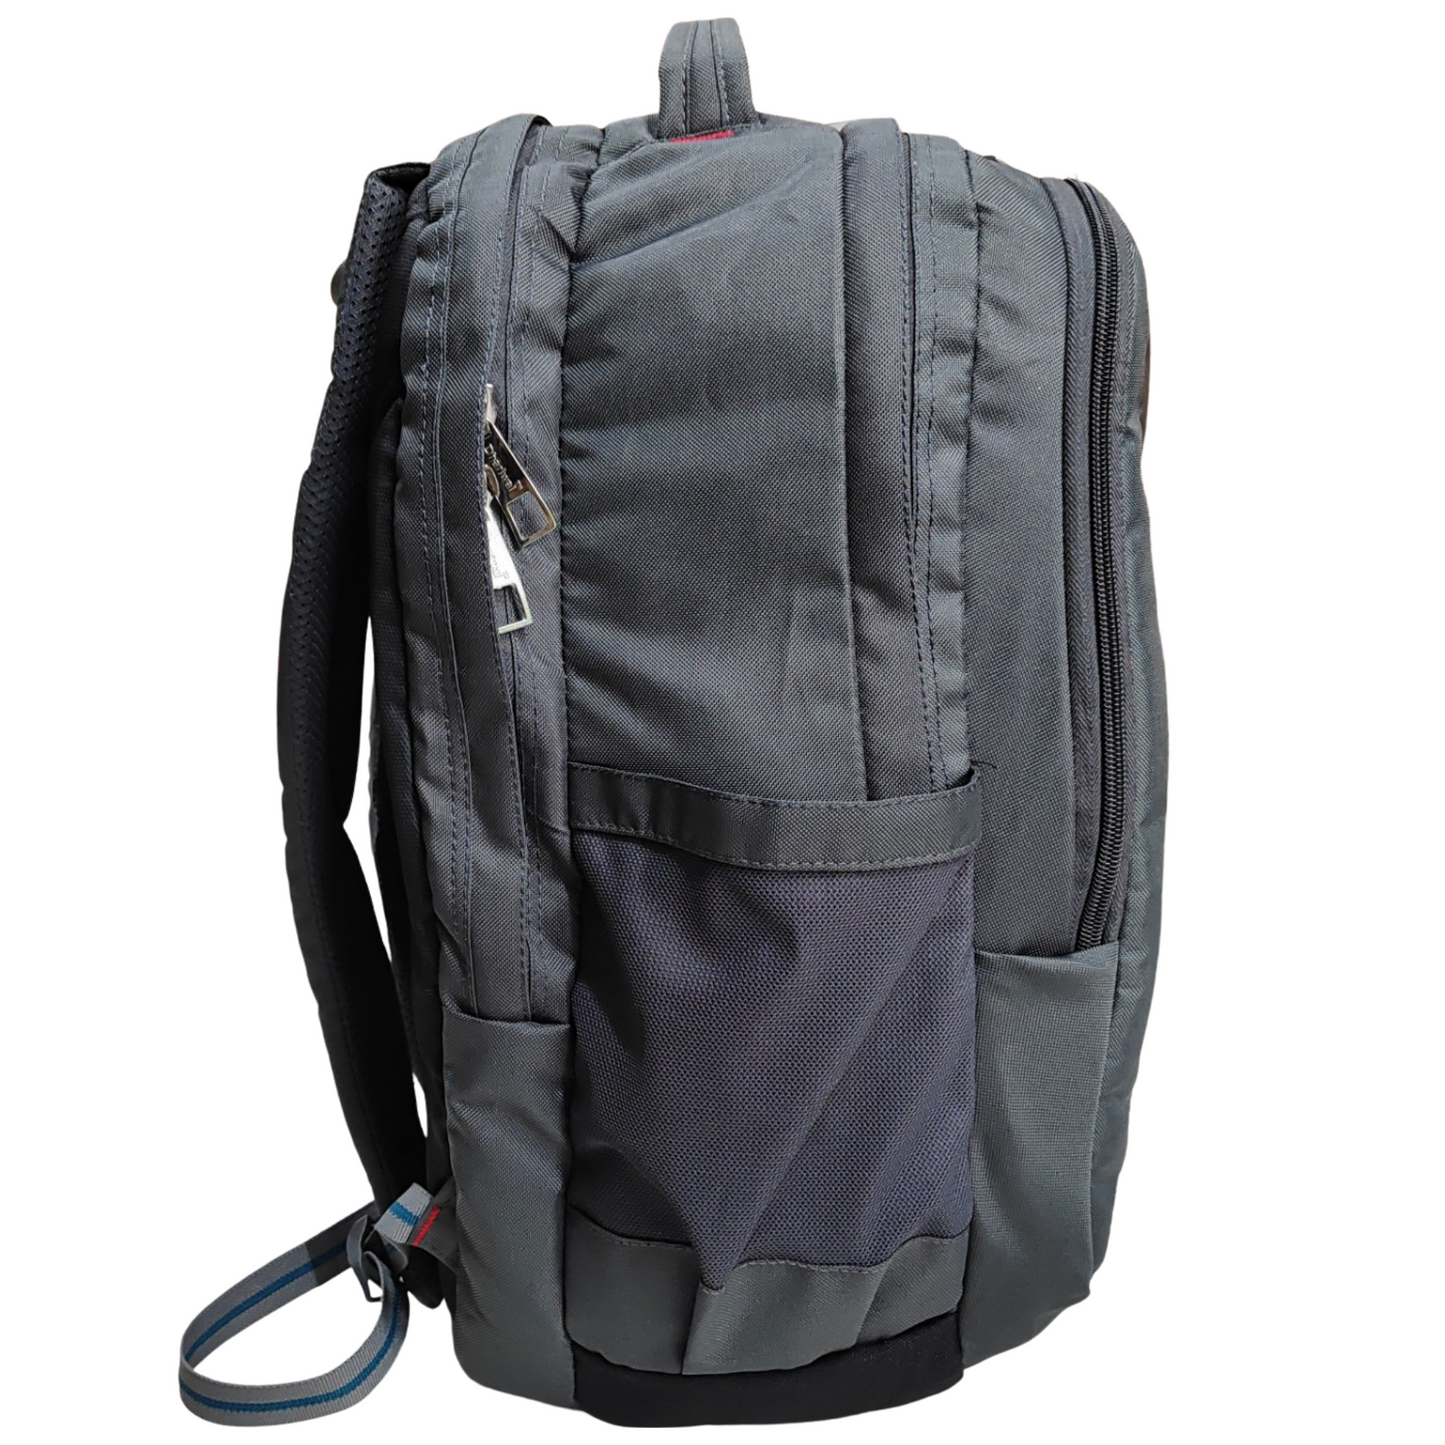 Dhariwal 33L Water Resistant Dual Compartment Backpack BP-219